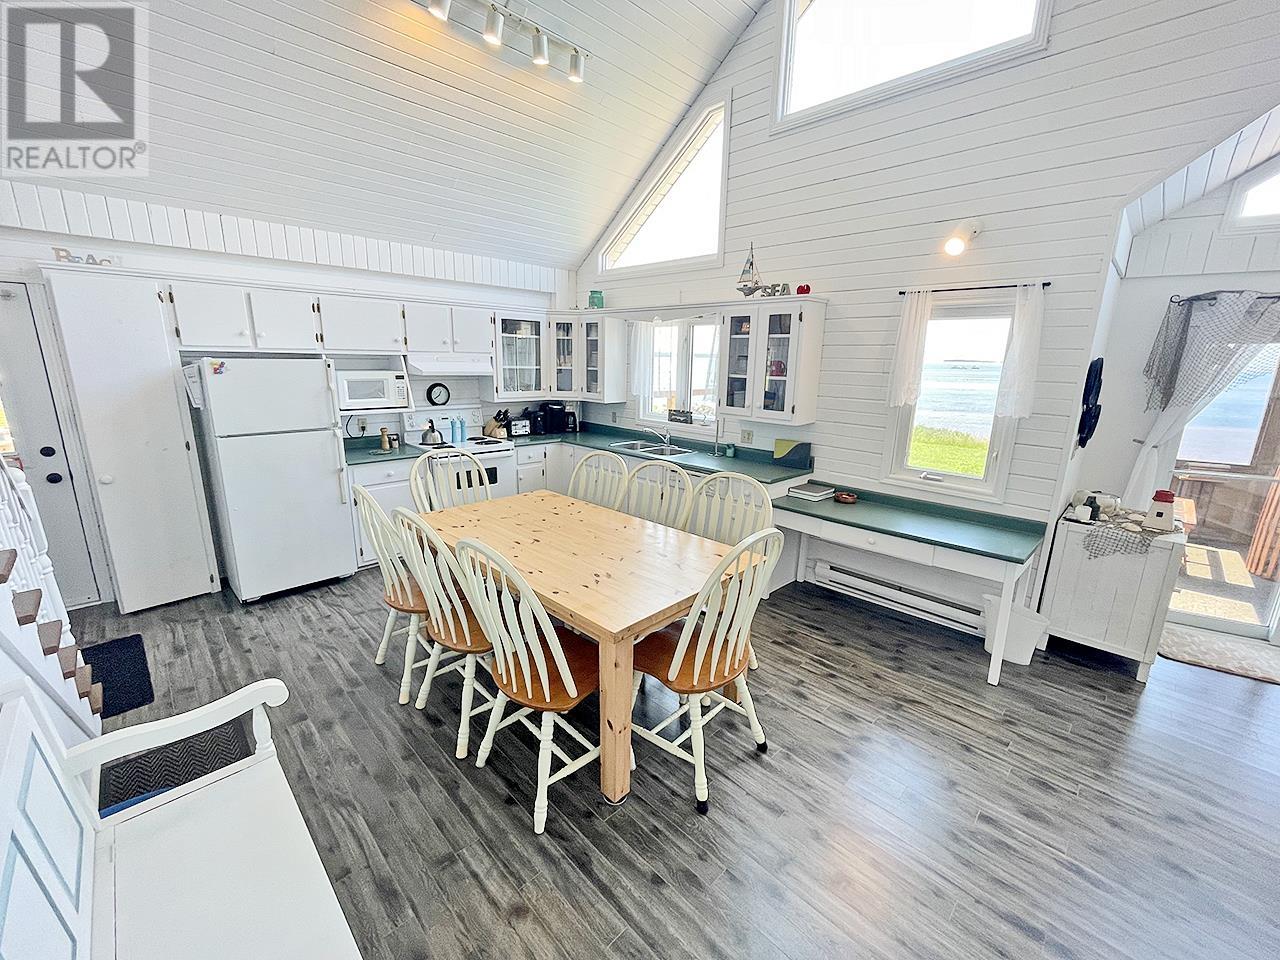 108 Lowe Lane, Blooming Point, Prince Edward Island  C0A 1T0 - Photo 22 - 202314589